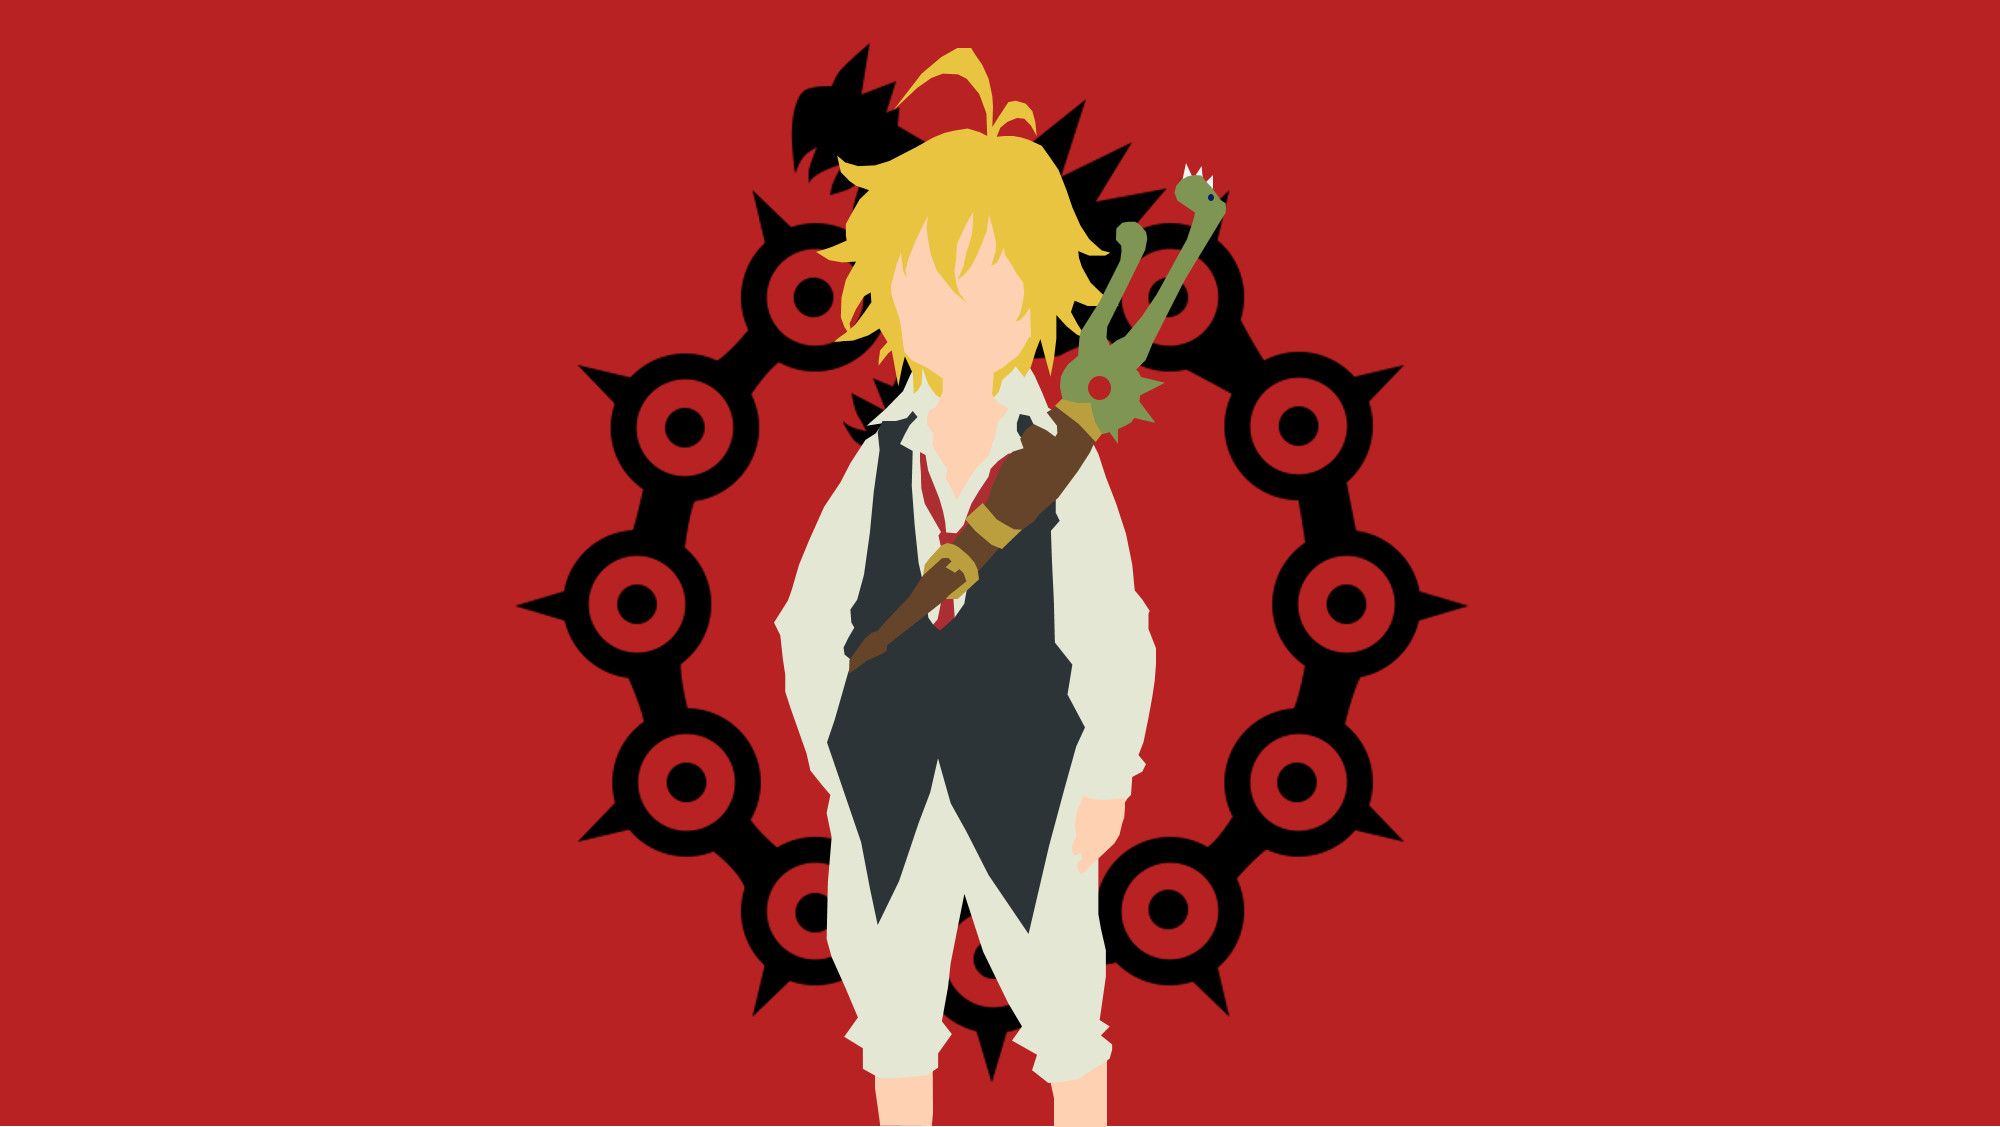 2000x1127 Meliodas from Seven Deadly Sins by Reverendtundra Meliodas from Seven  Deadly Sins by Reverendtundra